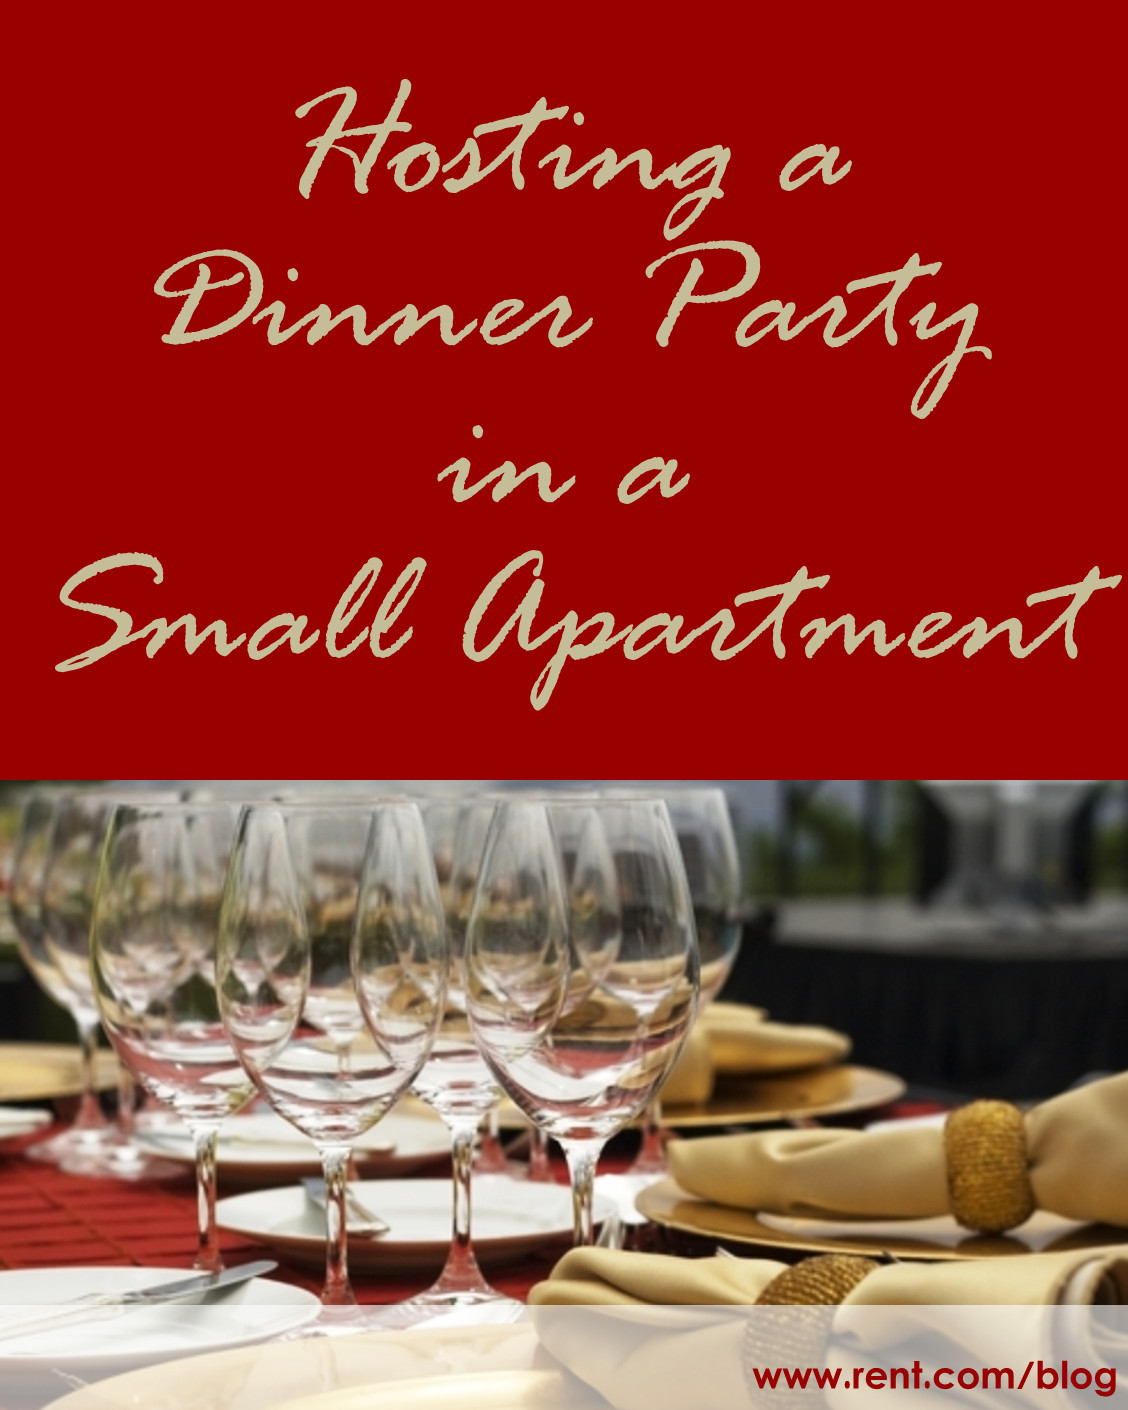 Small Dinner Party Ideas
 Hosting a Dinner Party in a Small Apartment